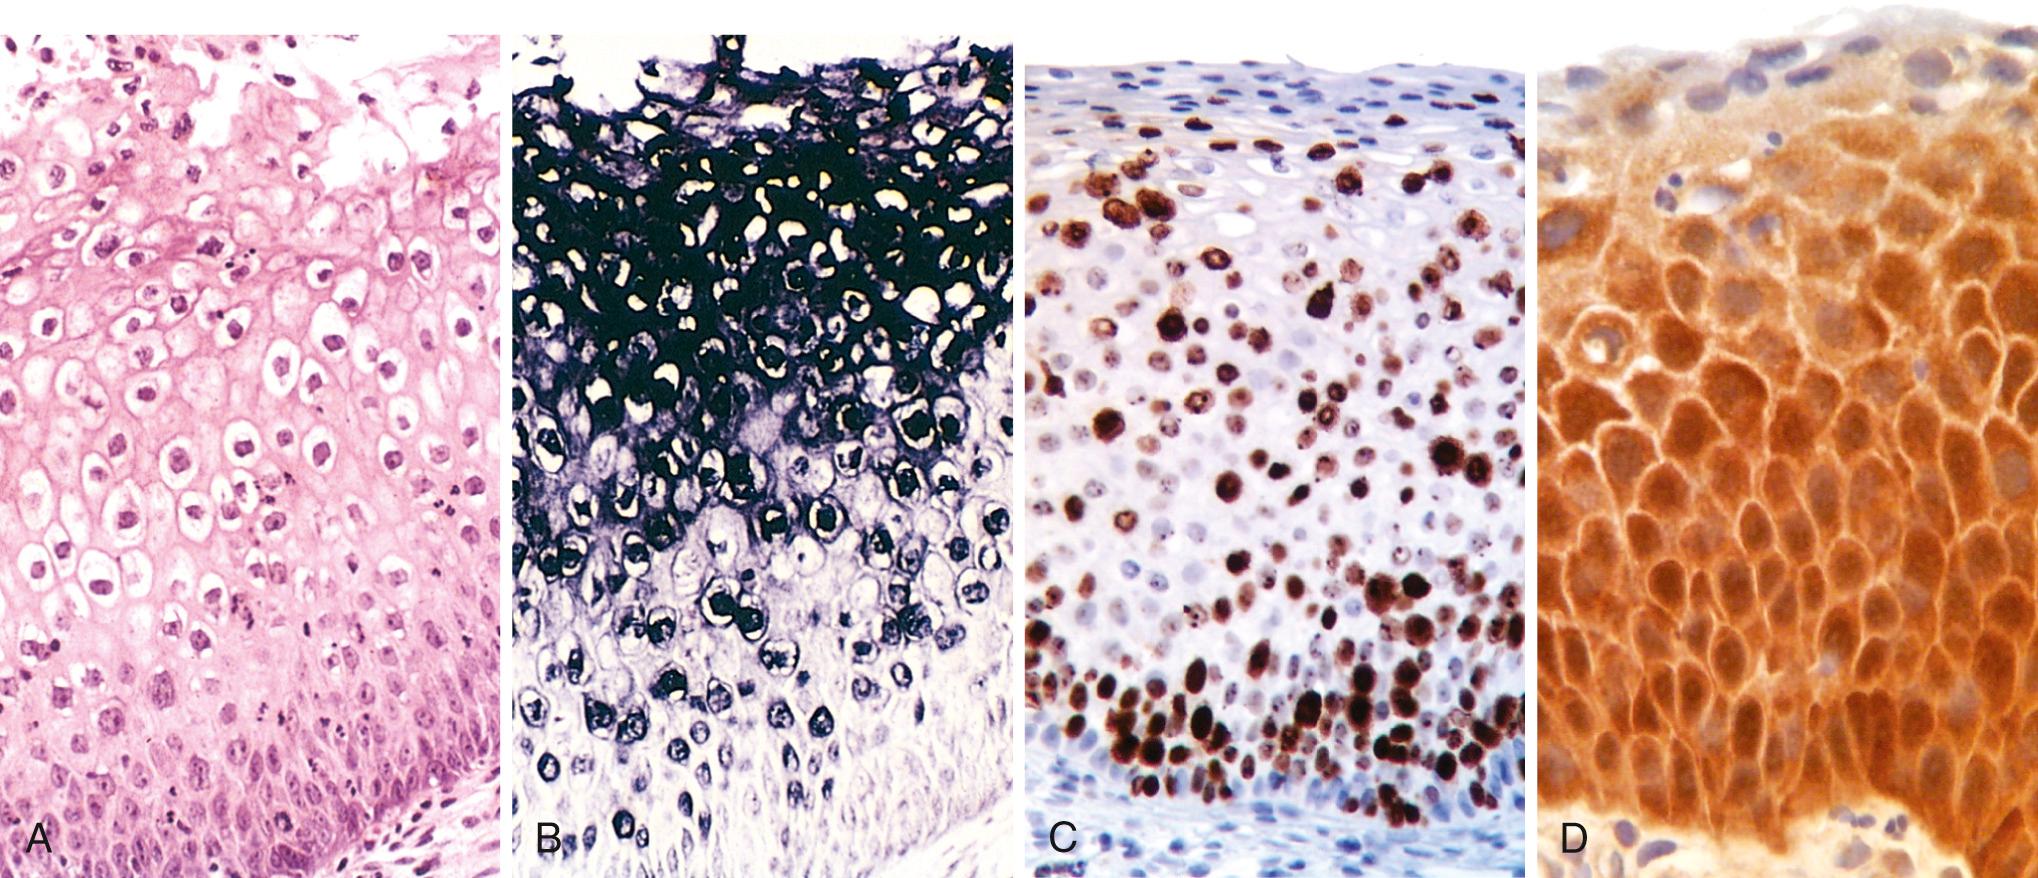 Figure 22.15, (A) Low-grade squamous intraepithelial lesion: routine hematoxylin and eosin staining shows koilocytic change, seen as nuclear enlargement and perinuclear “halos.” (B) In situ hybridization test for human papillomavirus deoxyribonucleic acid (HPV DNA). The dark granular staining denotes HPV DNA, which is most abundant in the superficial koilocytes. (C) Diffuse positivity for the proliferation marker Ki-67 (seen as brown nuclear staining), illustrates expansion of the proliferating cells from the normal basal location to the superficial layers of the epithelium. (D) Up-regulation of the cyclin-dependent kinase inhibitor p16 (seen here as brown staining) characterizes high-risk HPV infections.